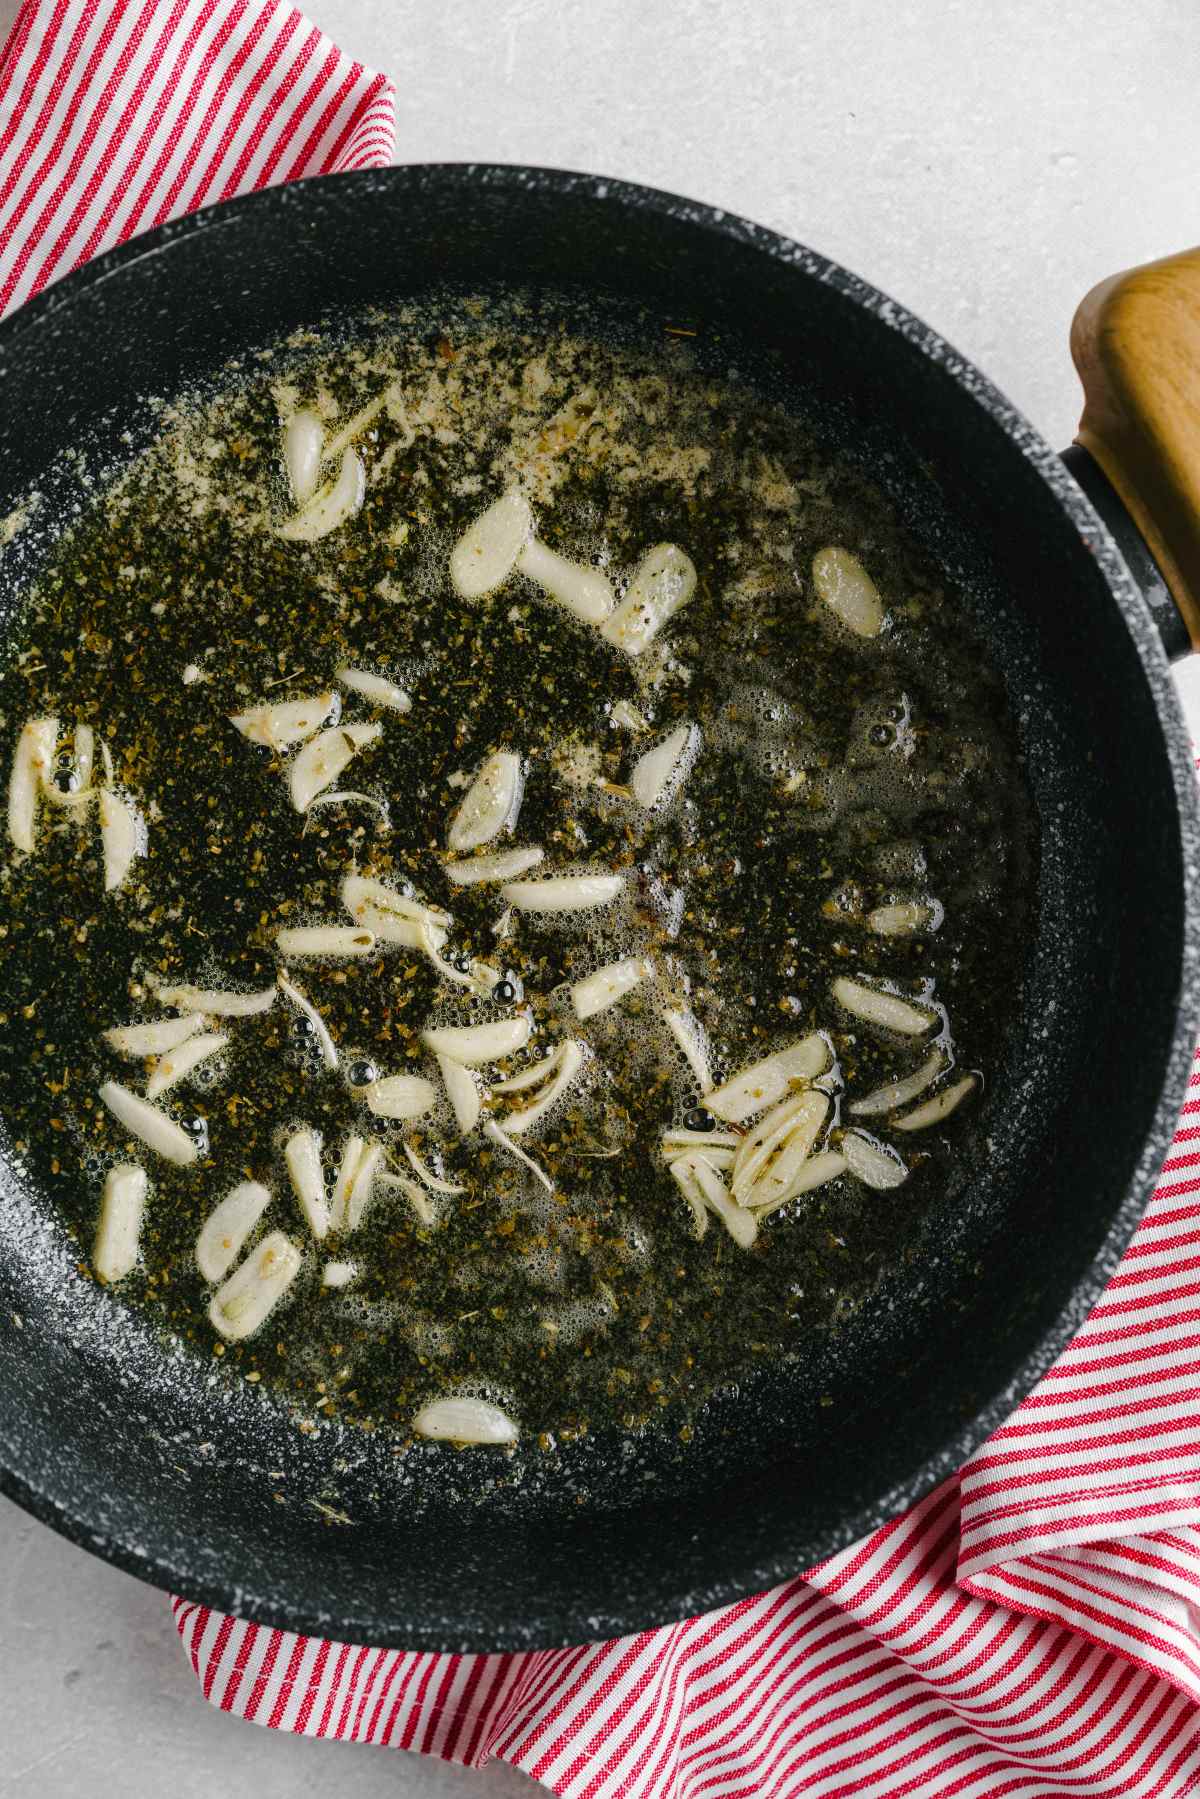 Garlic being fried in a pan of butter.